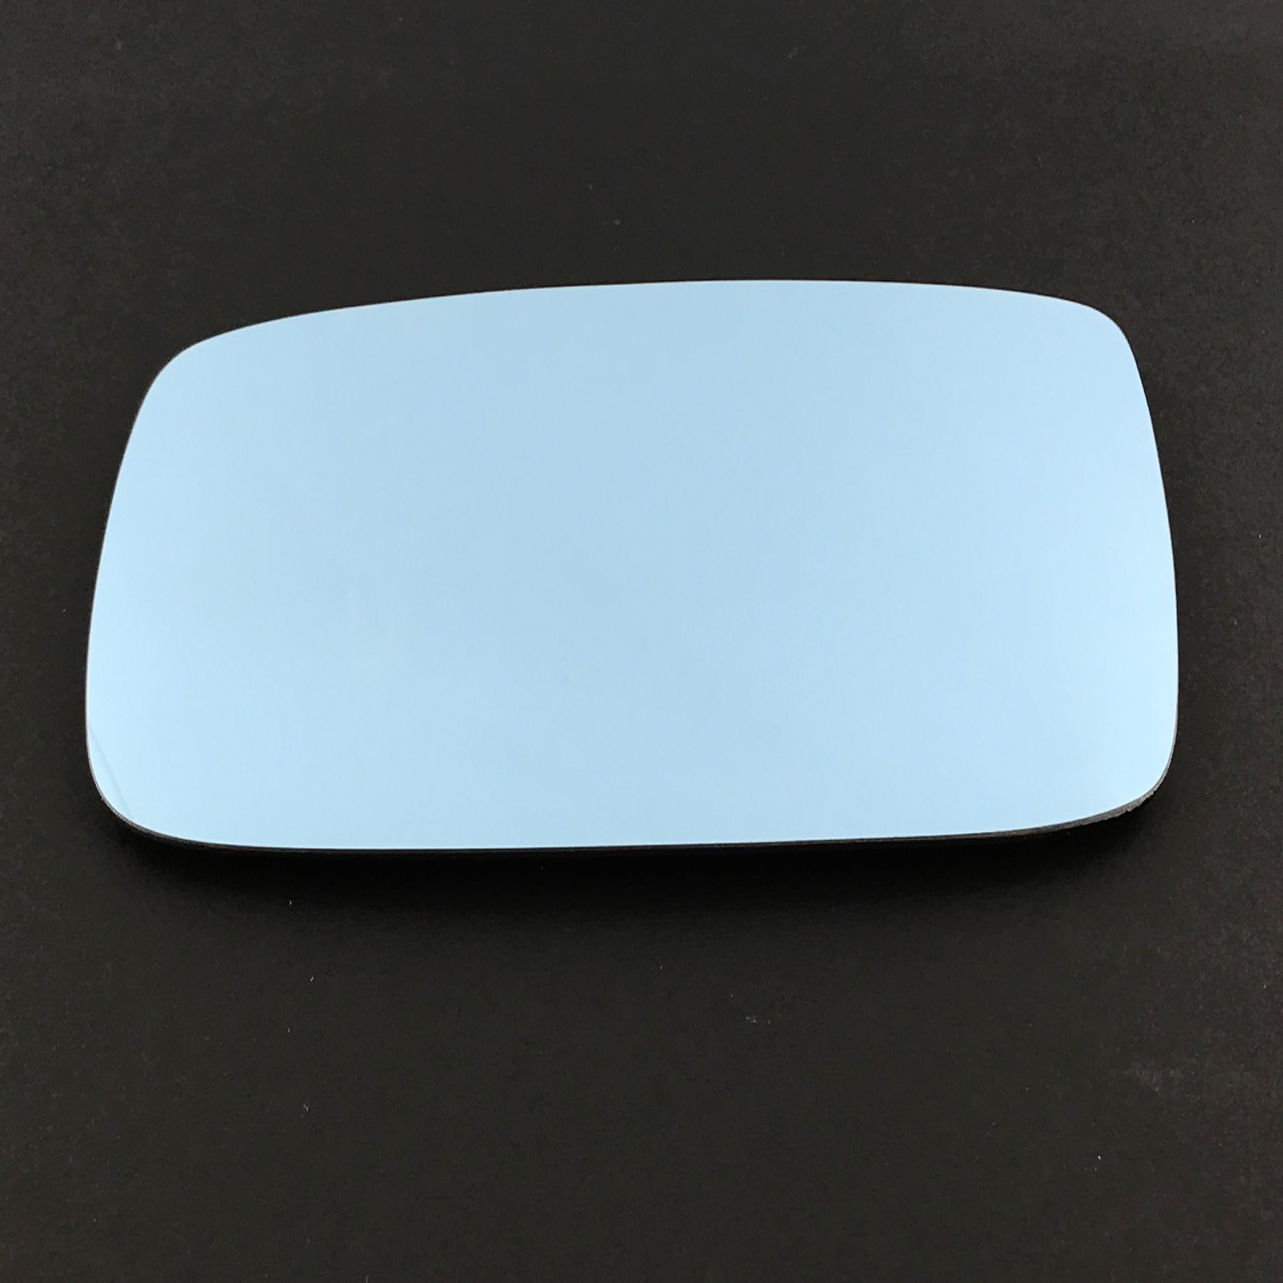 Volvo 740 Wing Mirror Glass RIGHT HAND ( UK Driver Side ) 1984 to 1992 – Convex Wing Mirror ( Blue Tinted )